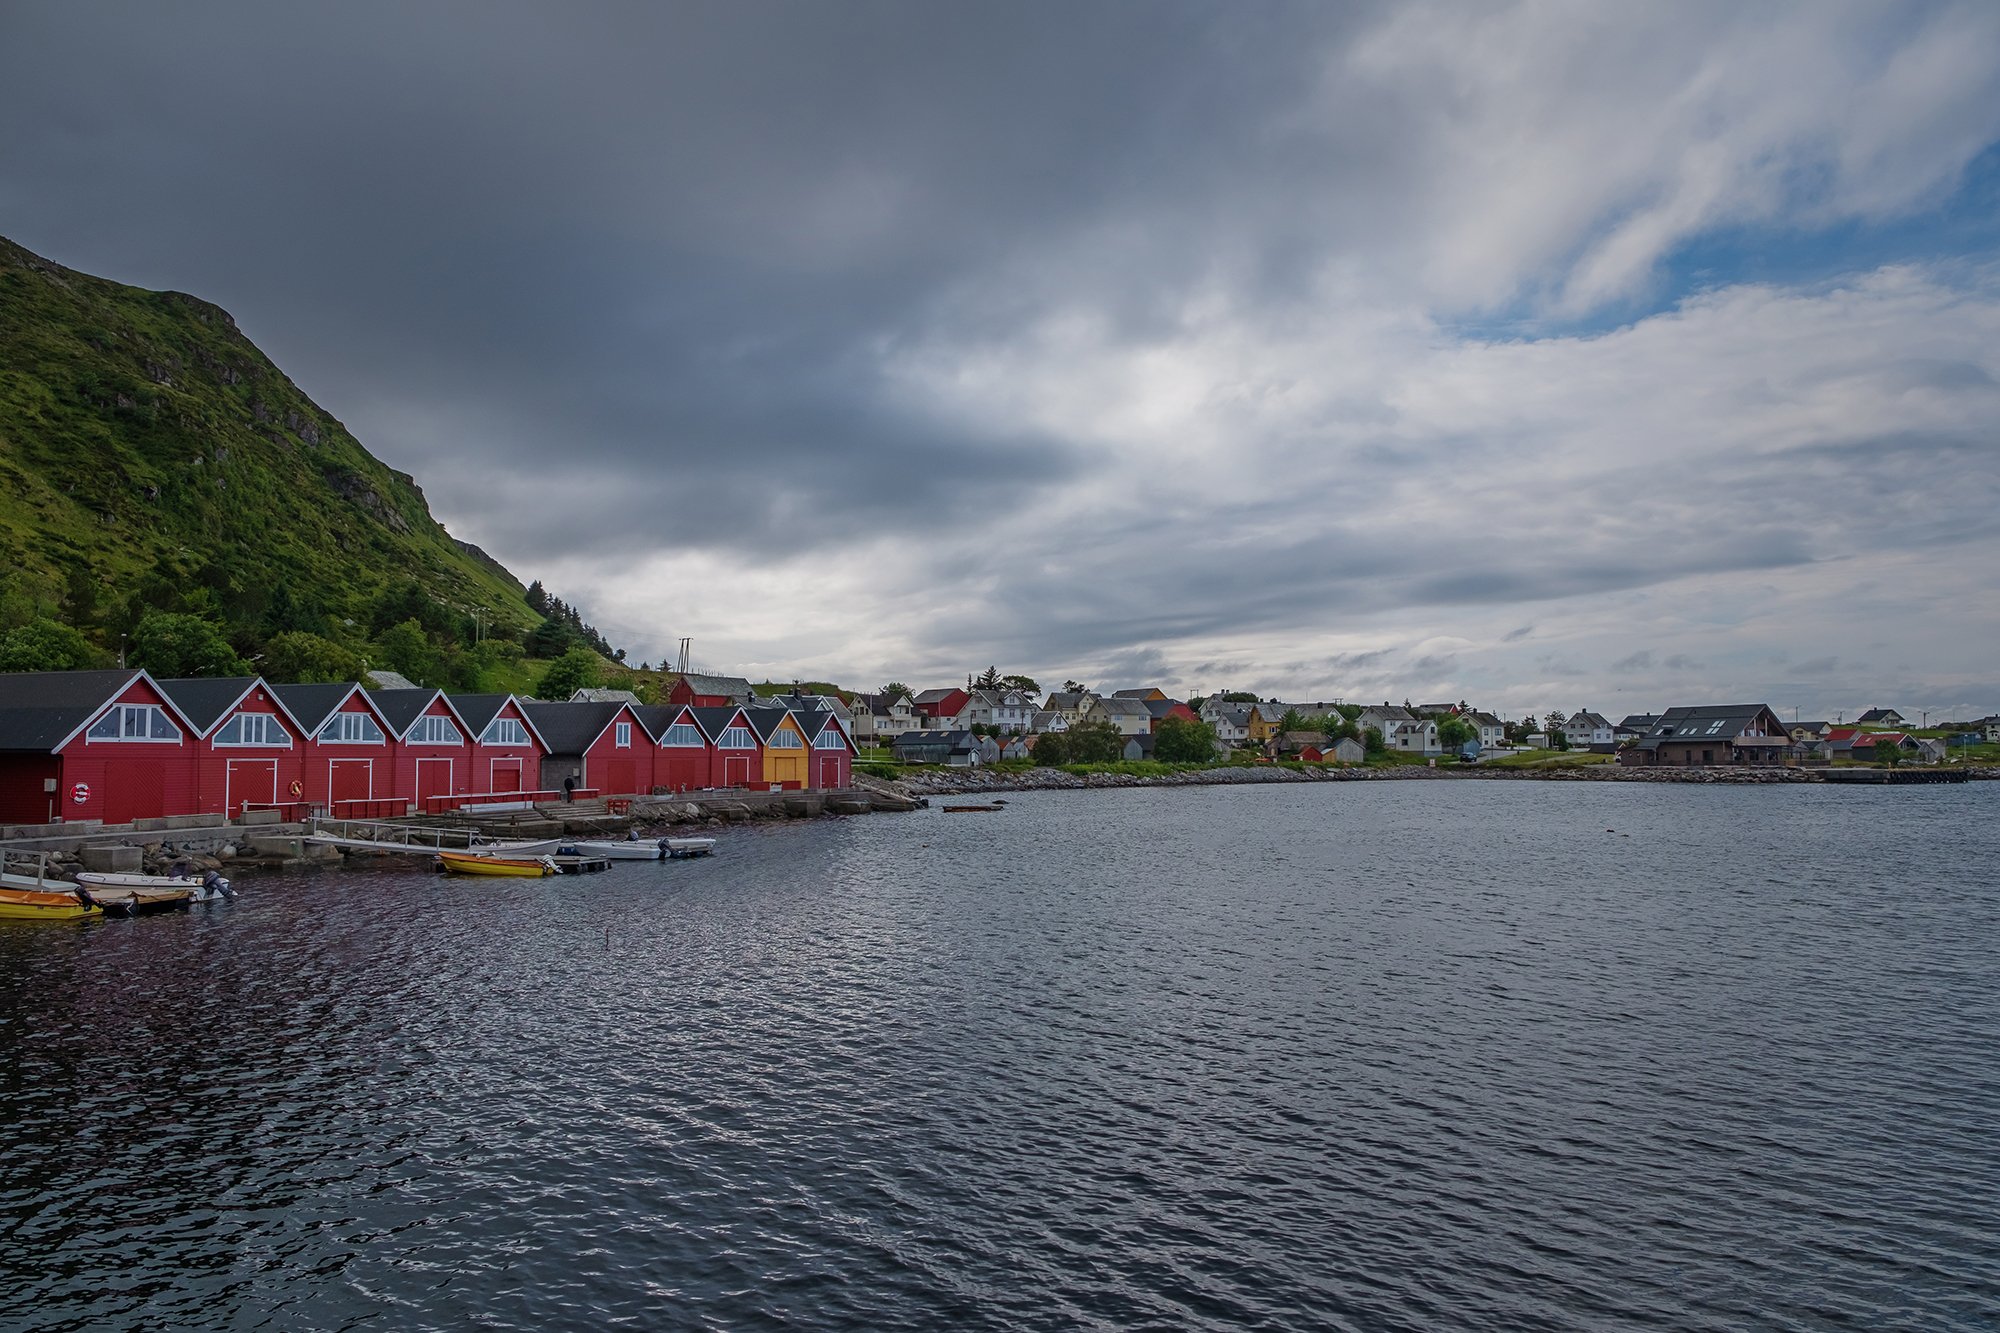 Boathouses at Alnes